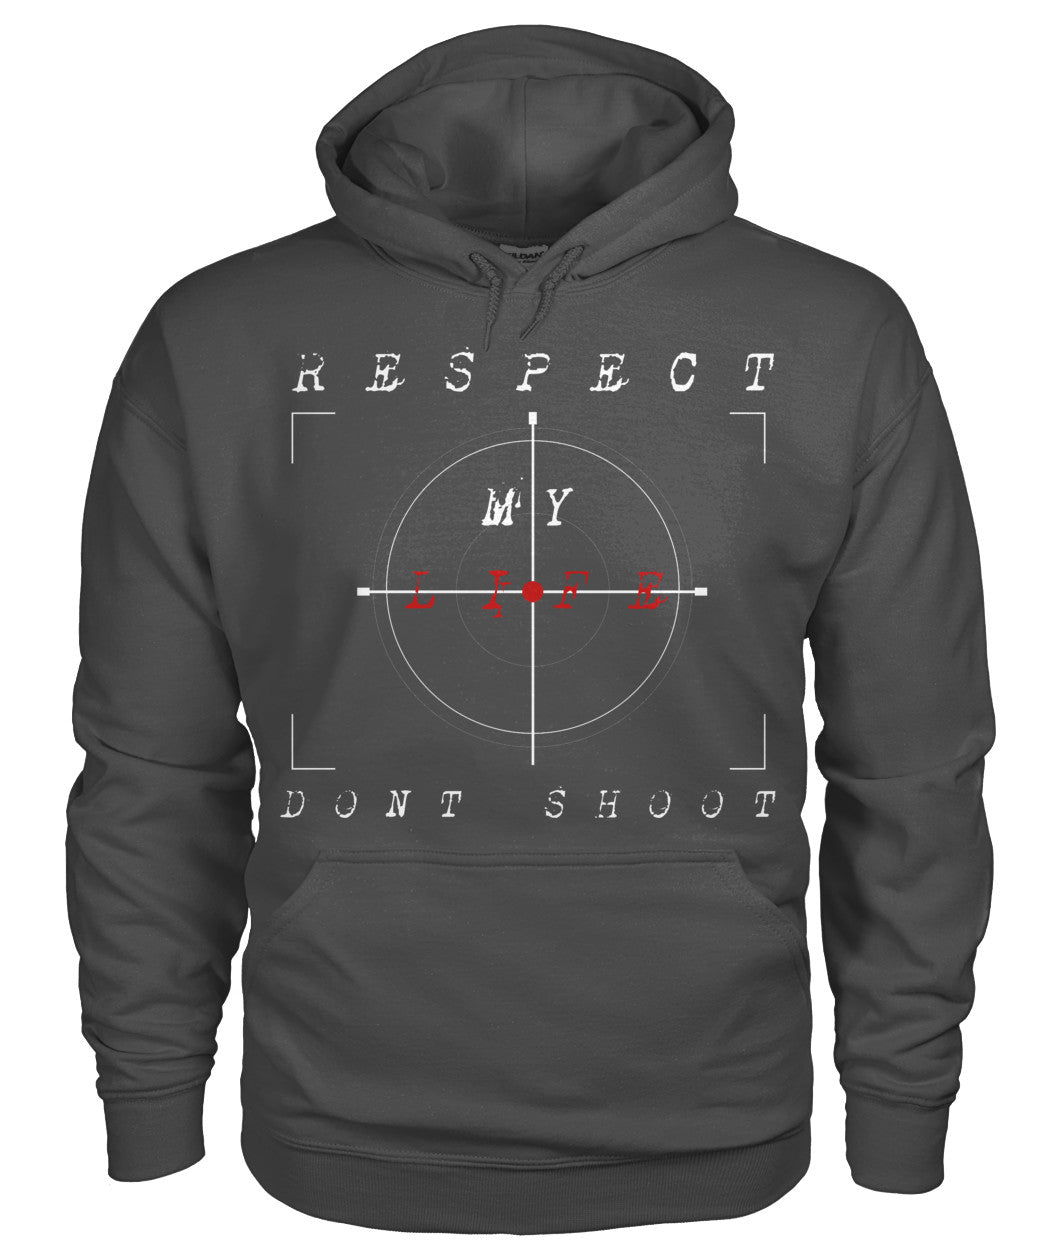 Respect My Life Dont Shoot (Hoodies)